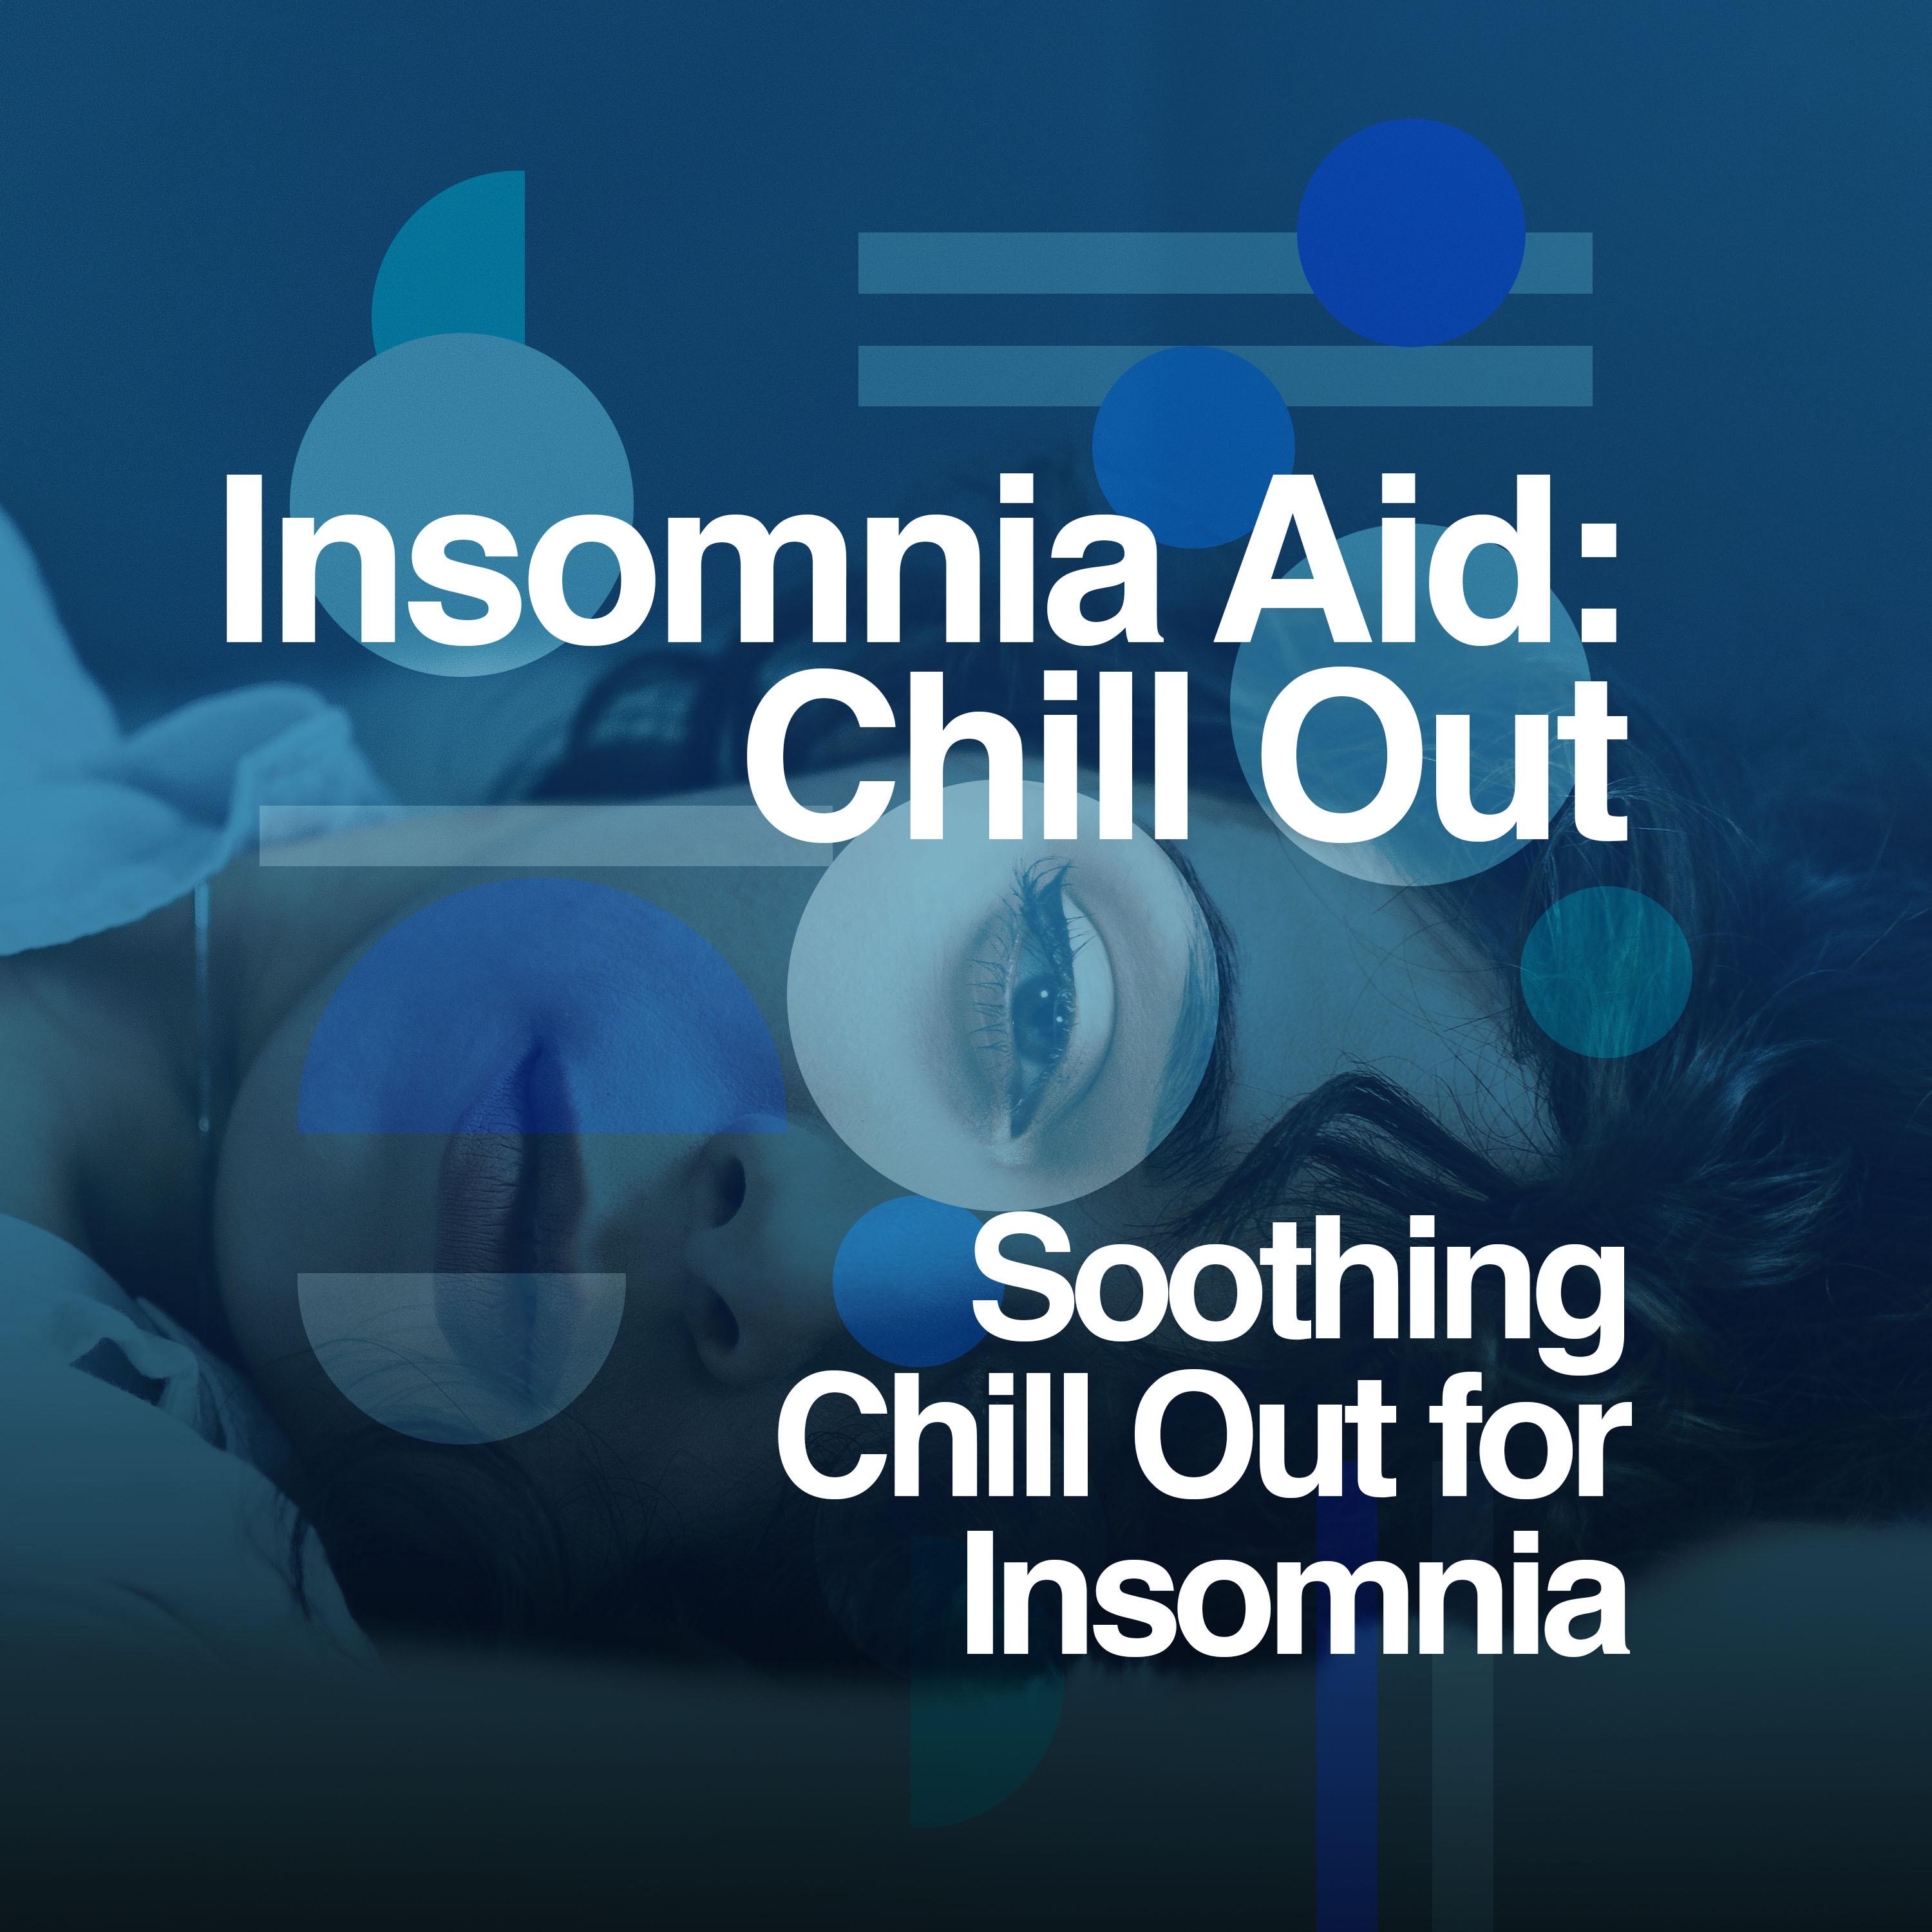 Insomnia Aid: Chill Out